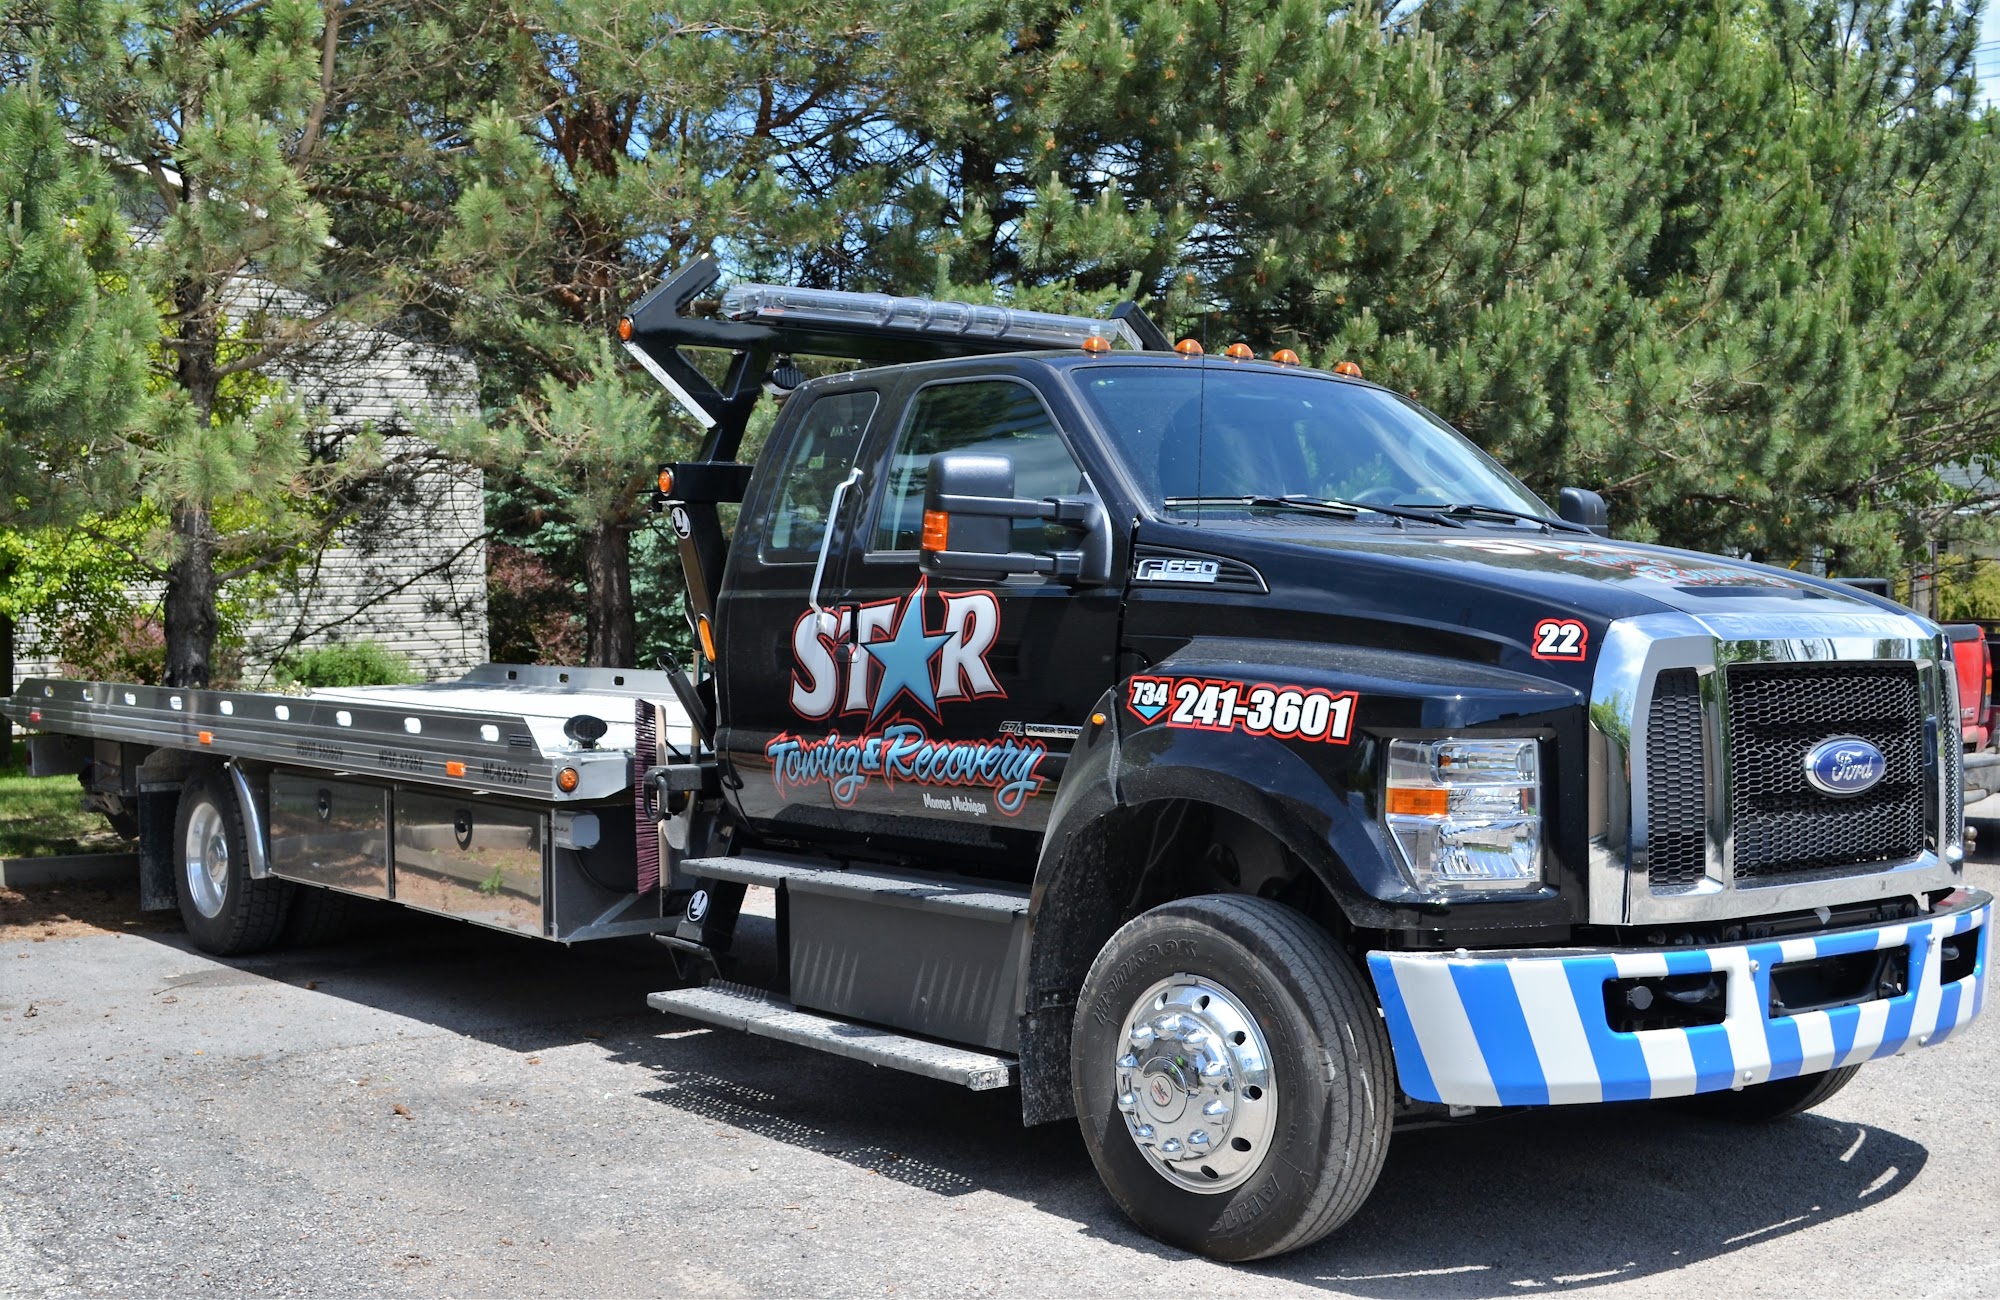 Star Towing & Recovery, LLC